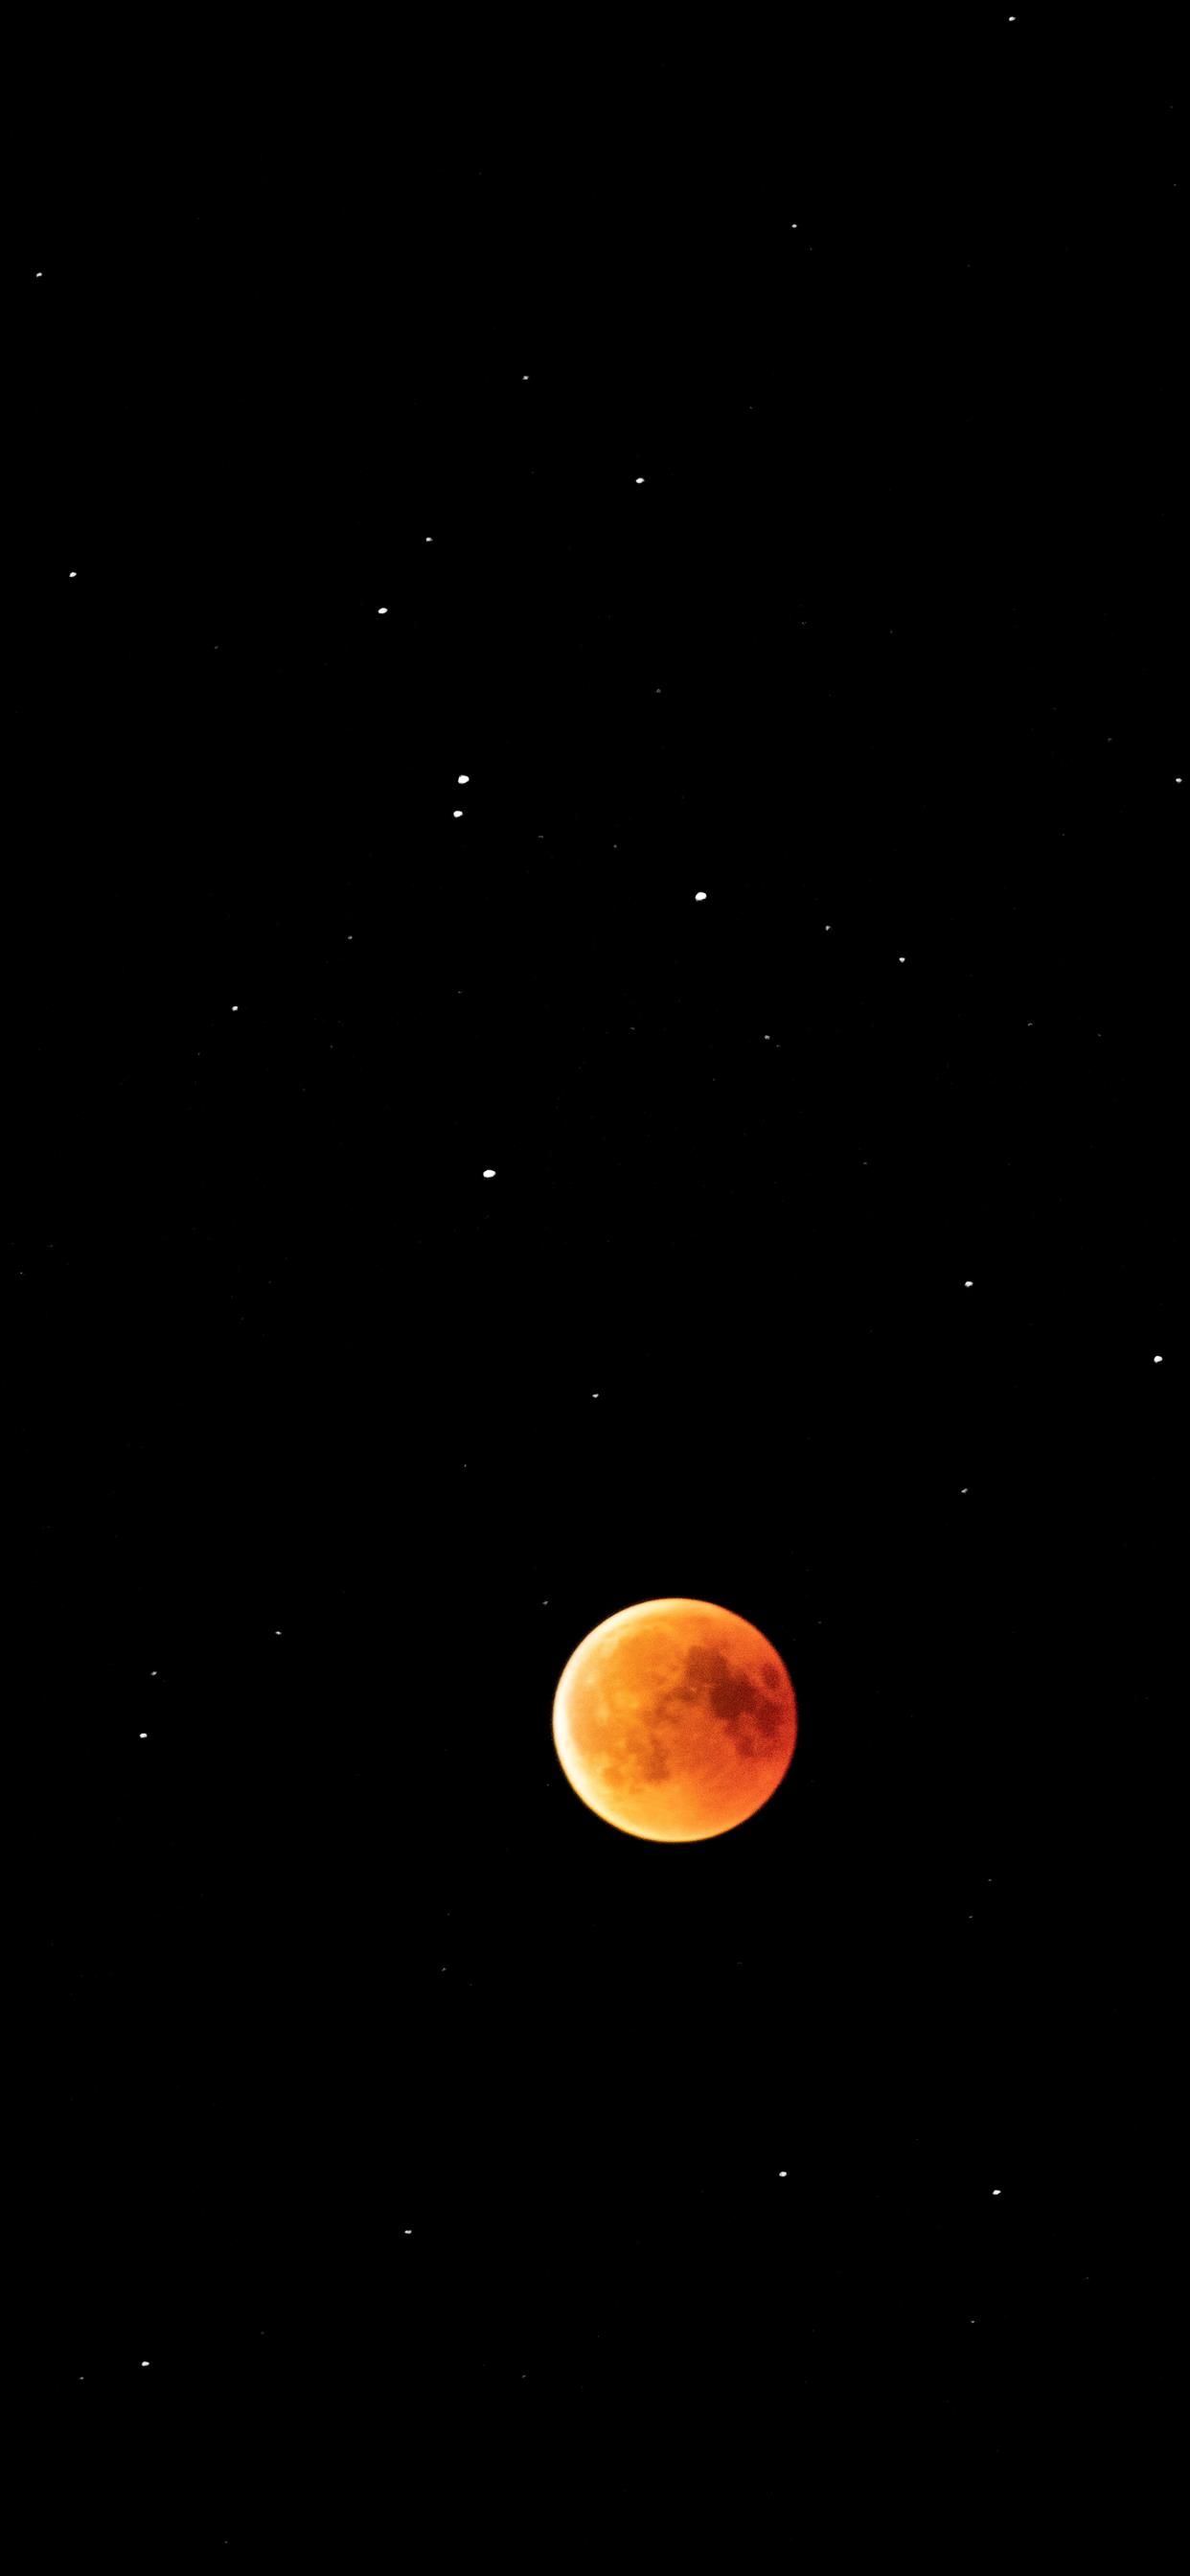 Lunar eclipse within the stars iPhone Wallpaper Free Download